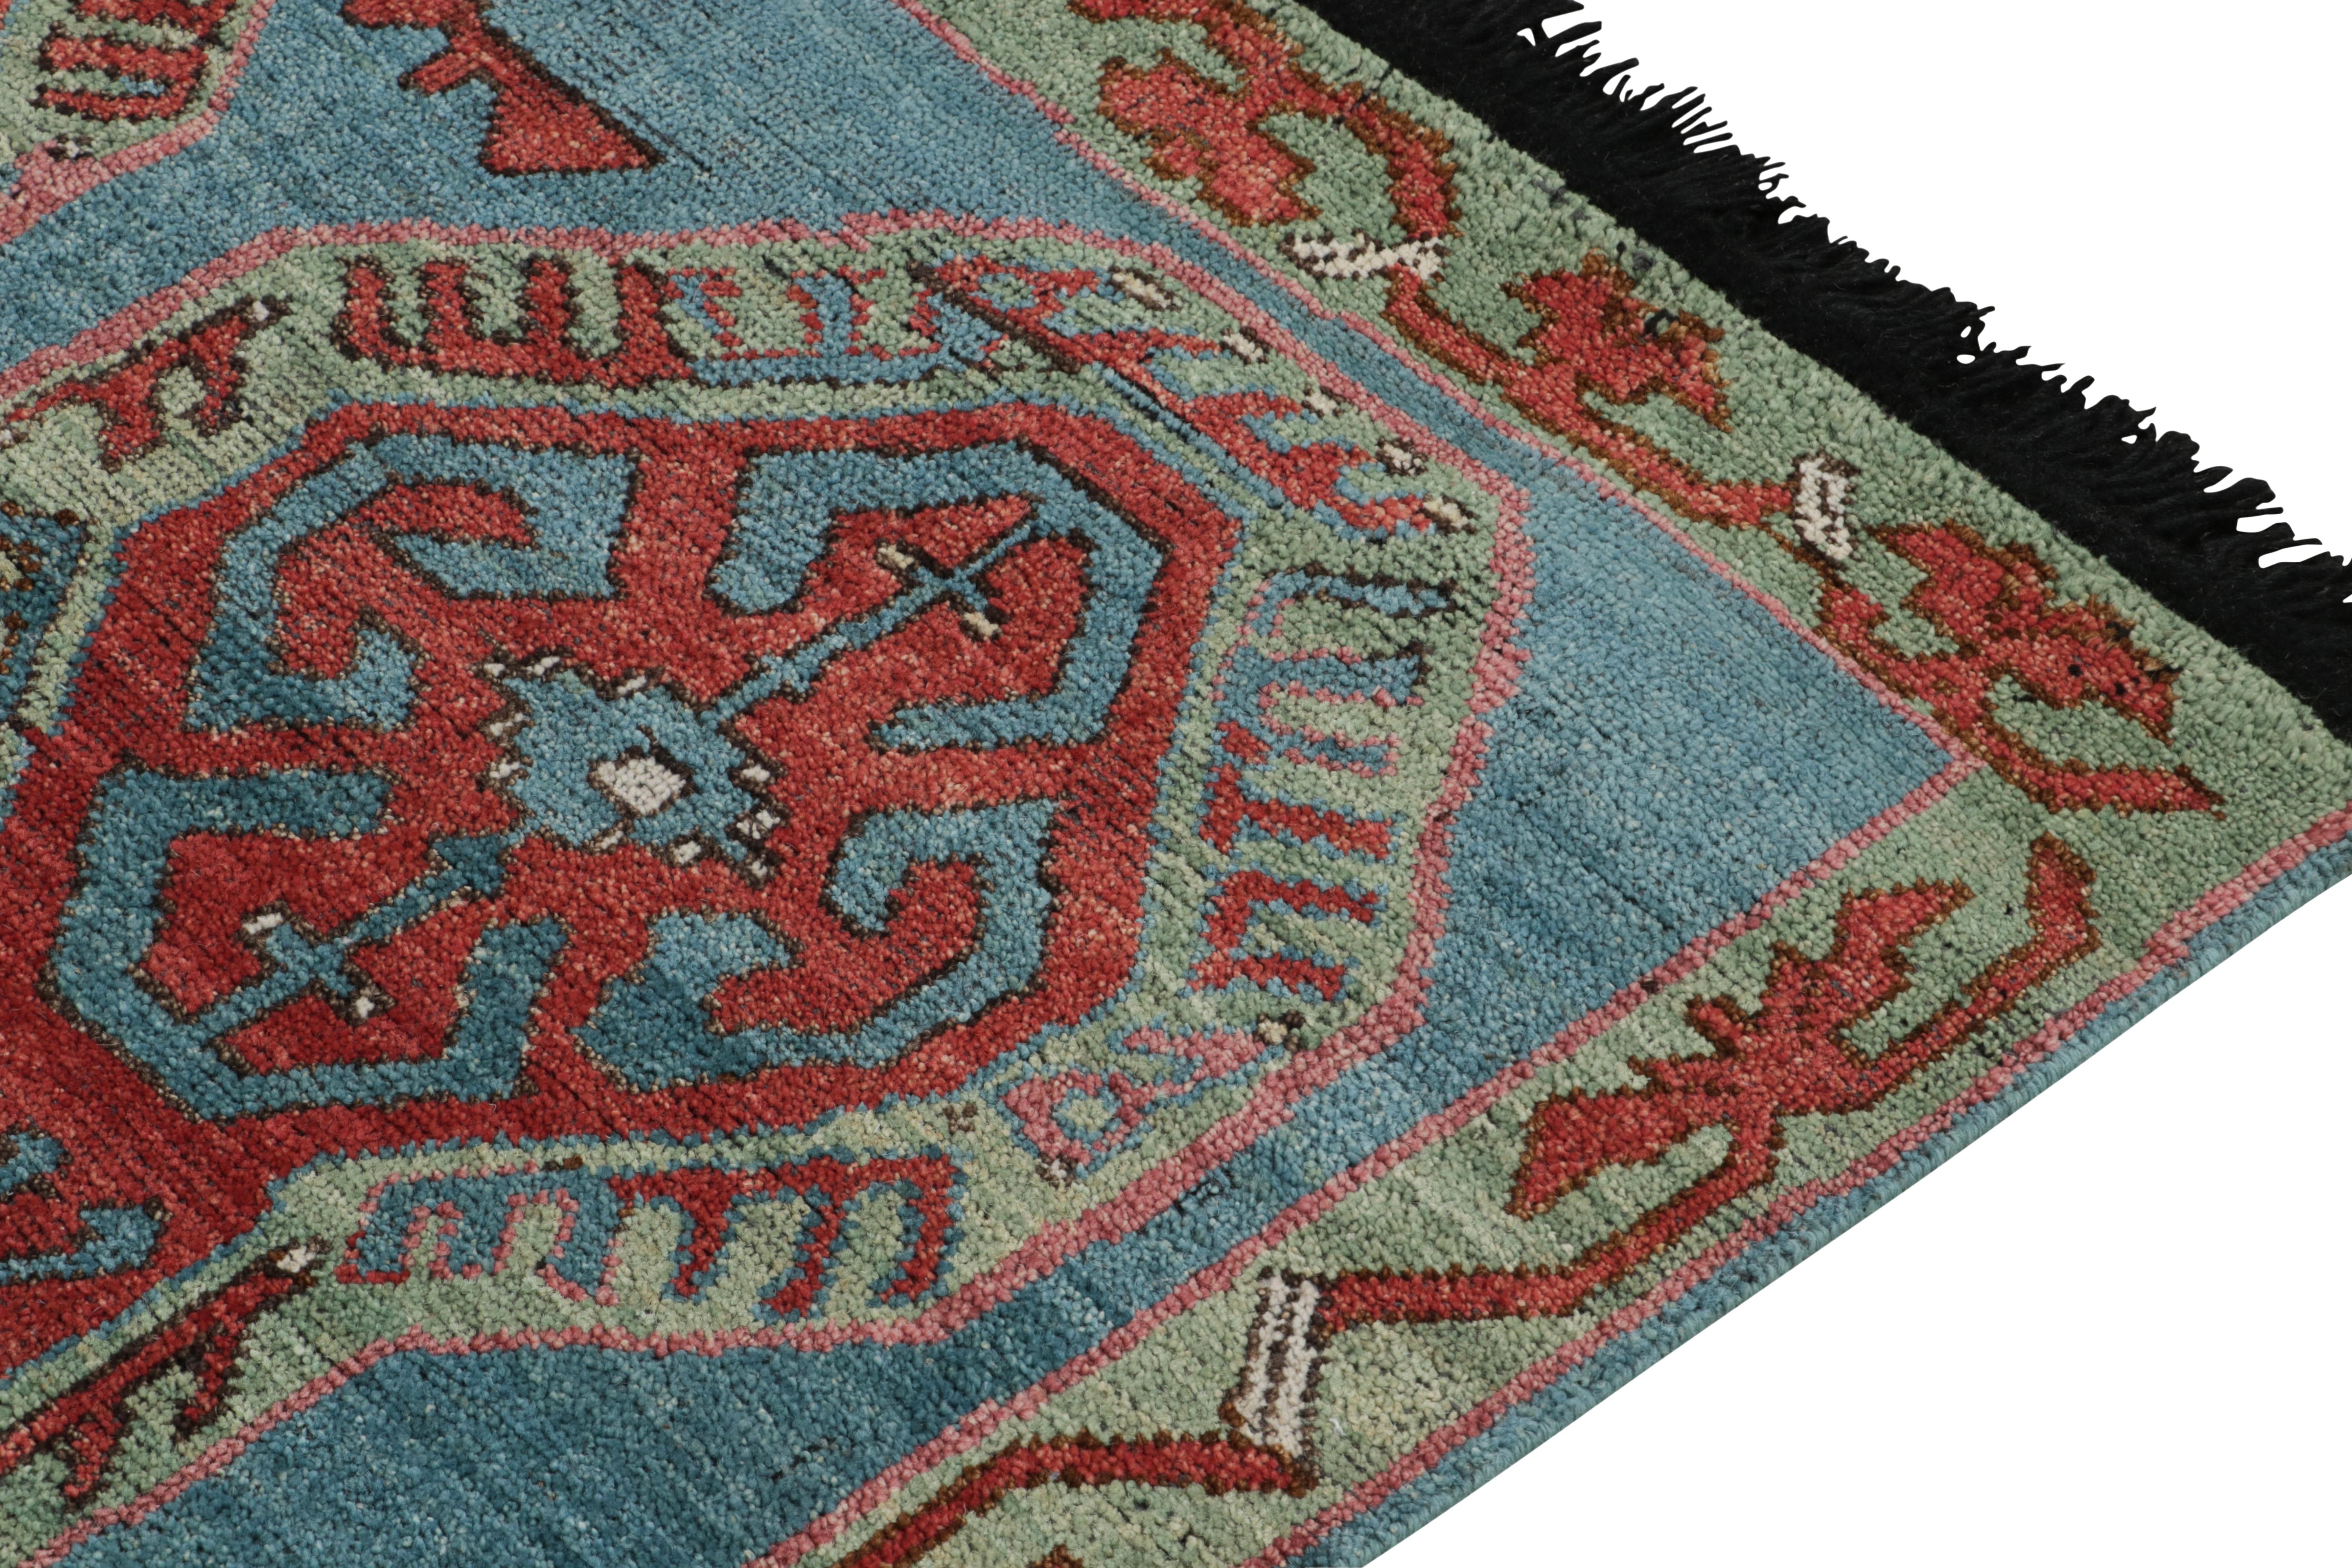 Contemporary Rug & Kilim's Tribal Style rug in Red, Blue, Green Geometric Pattern For Sale